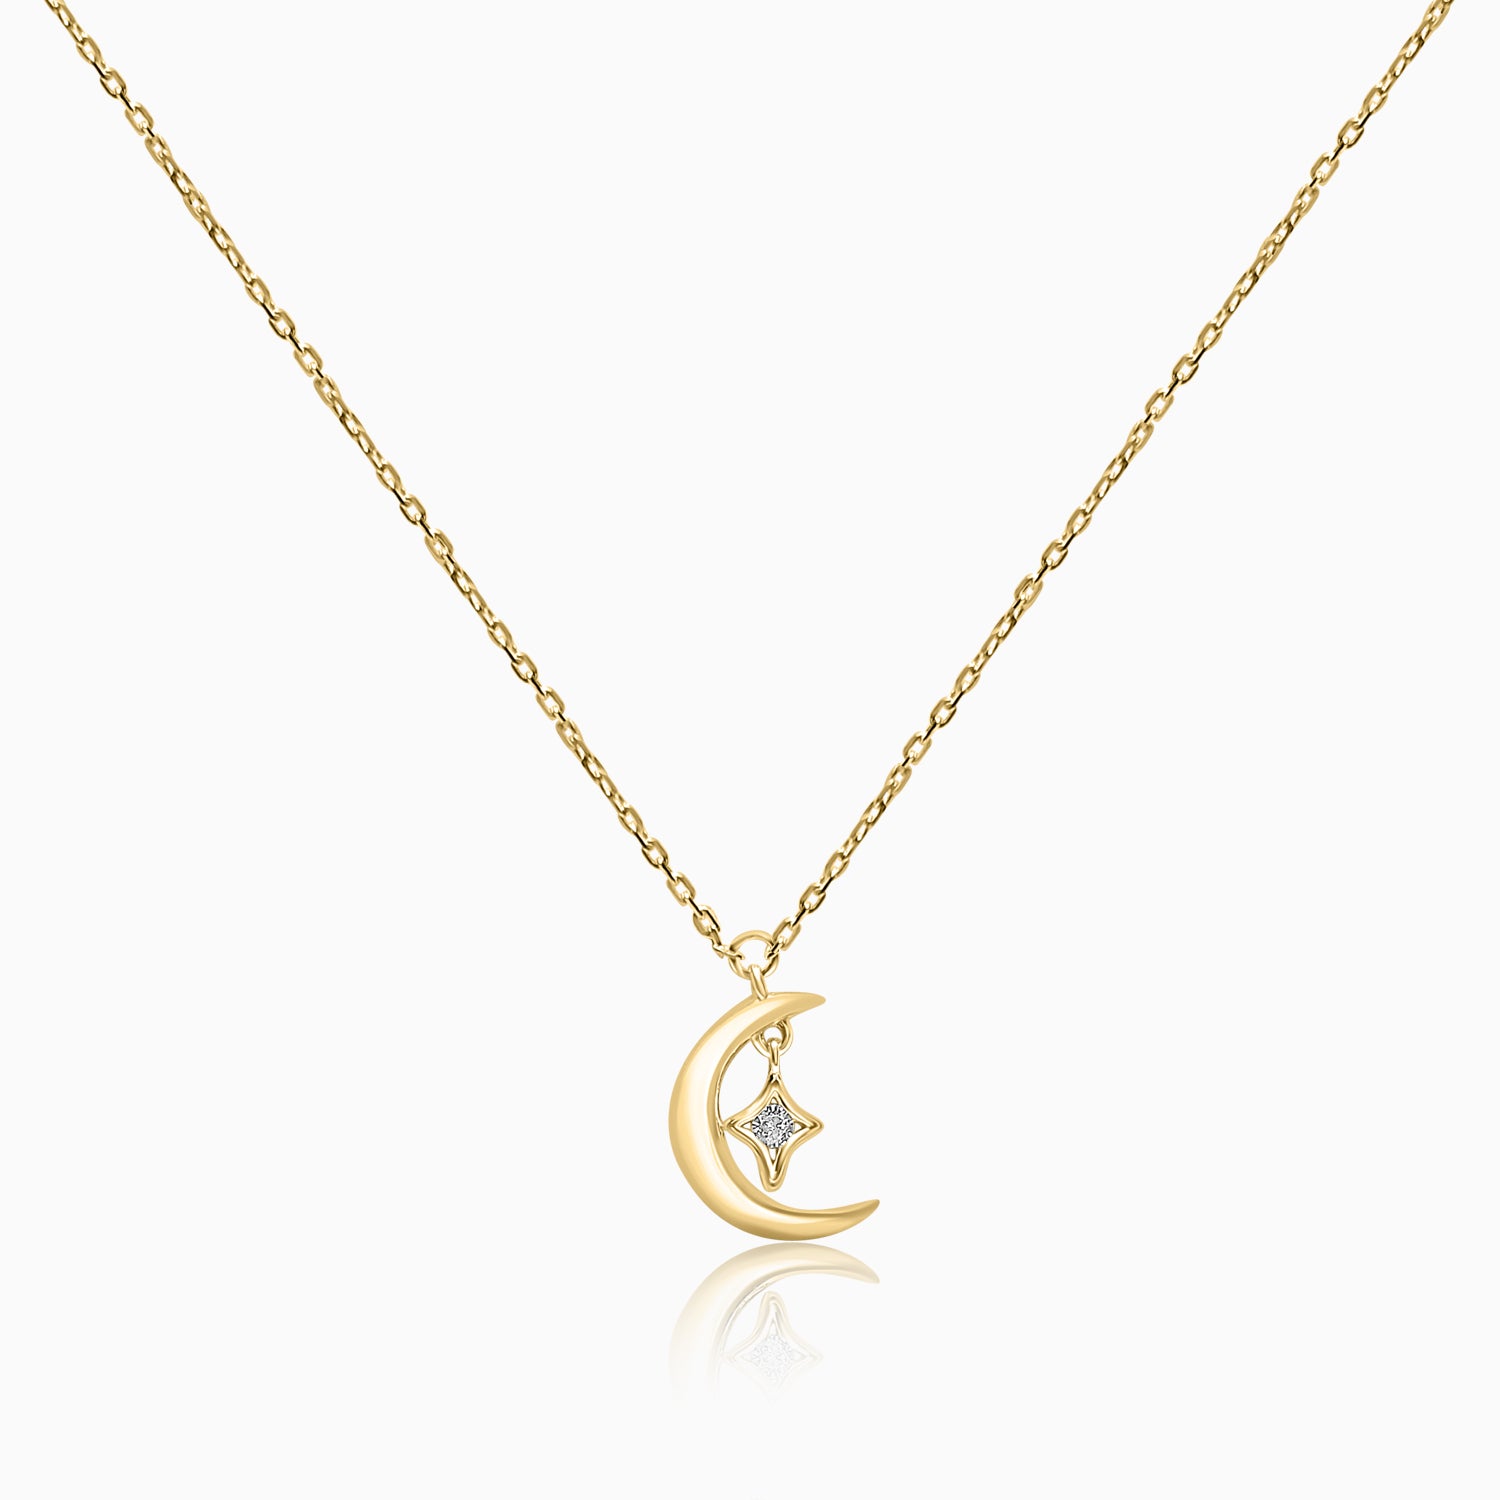 Silver Gold Dangling Moon Star Necklace